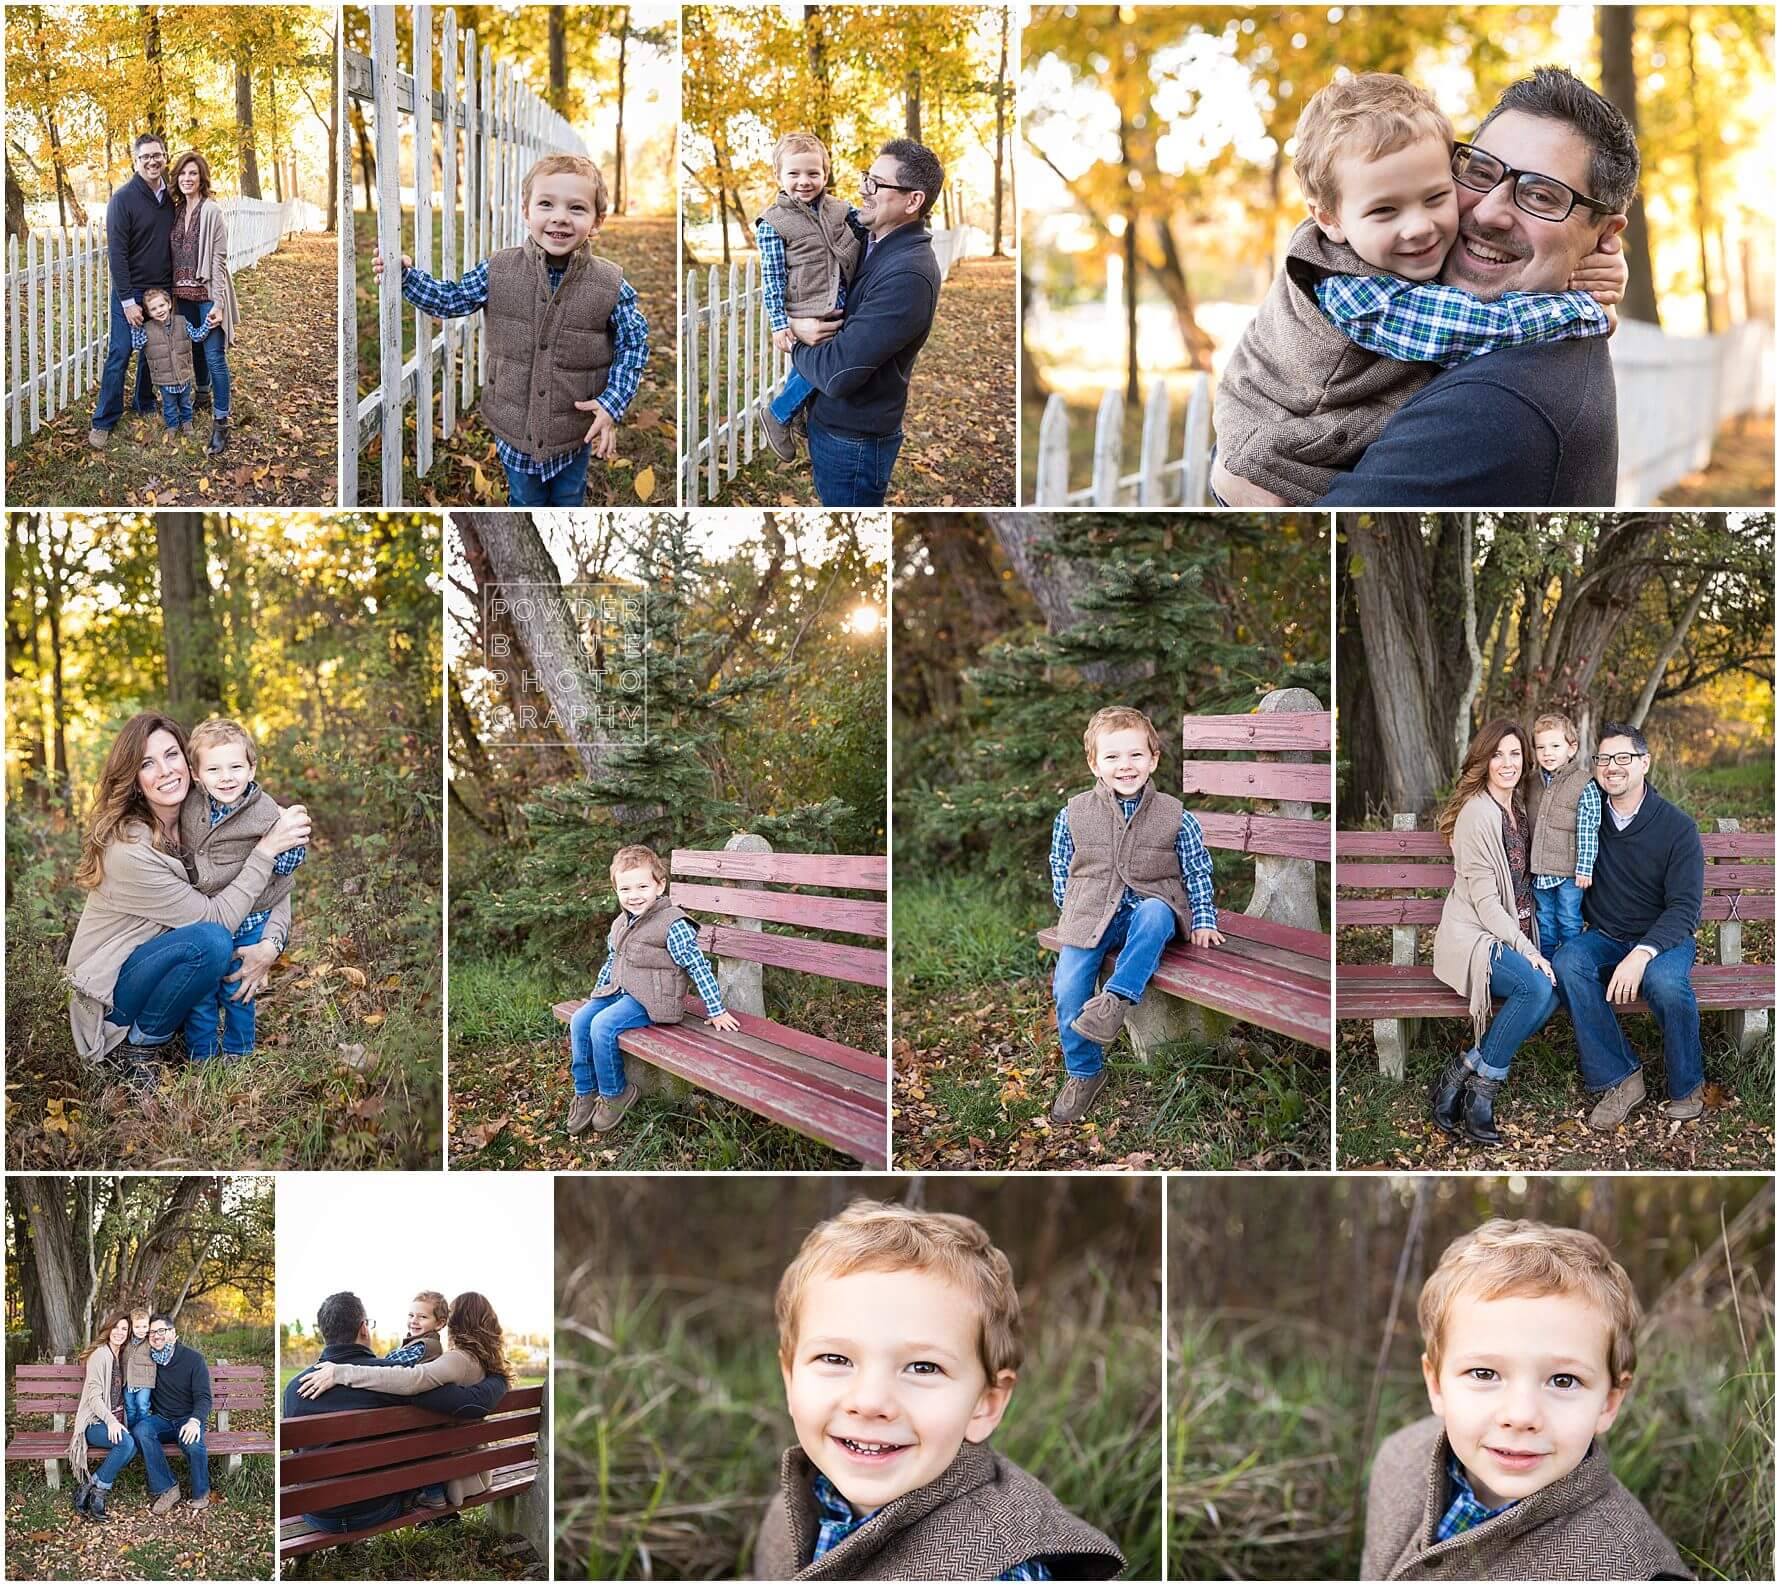 fall mini portrait session at fairview park in pittsburgh, pa. pittsburgh family photographer.